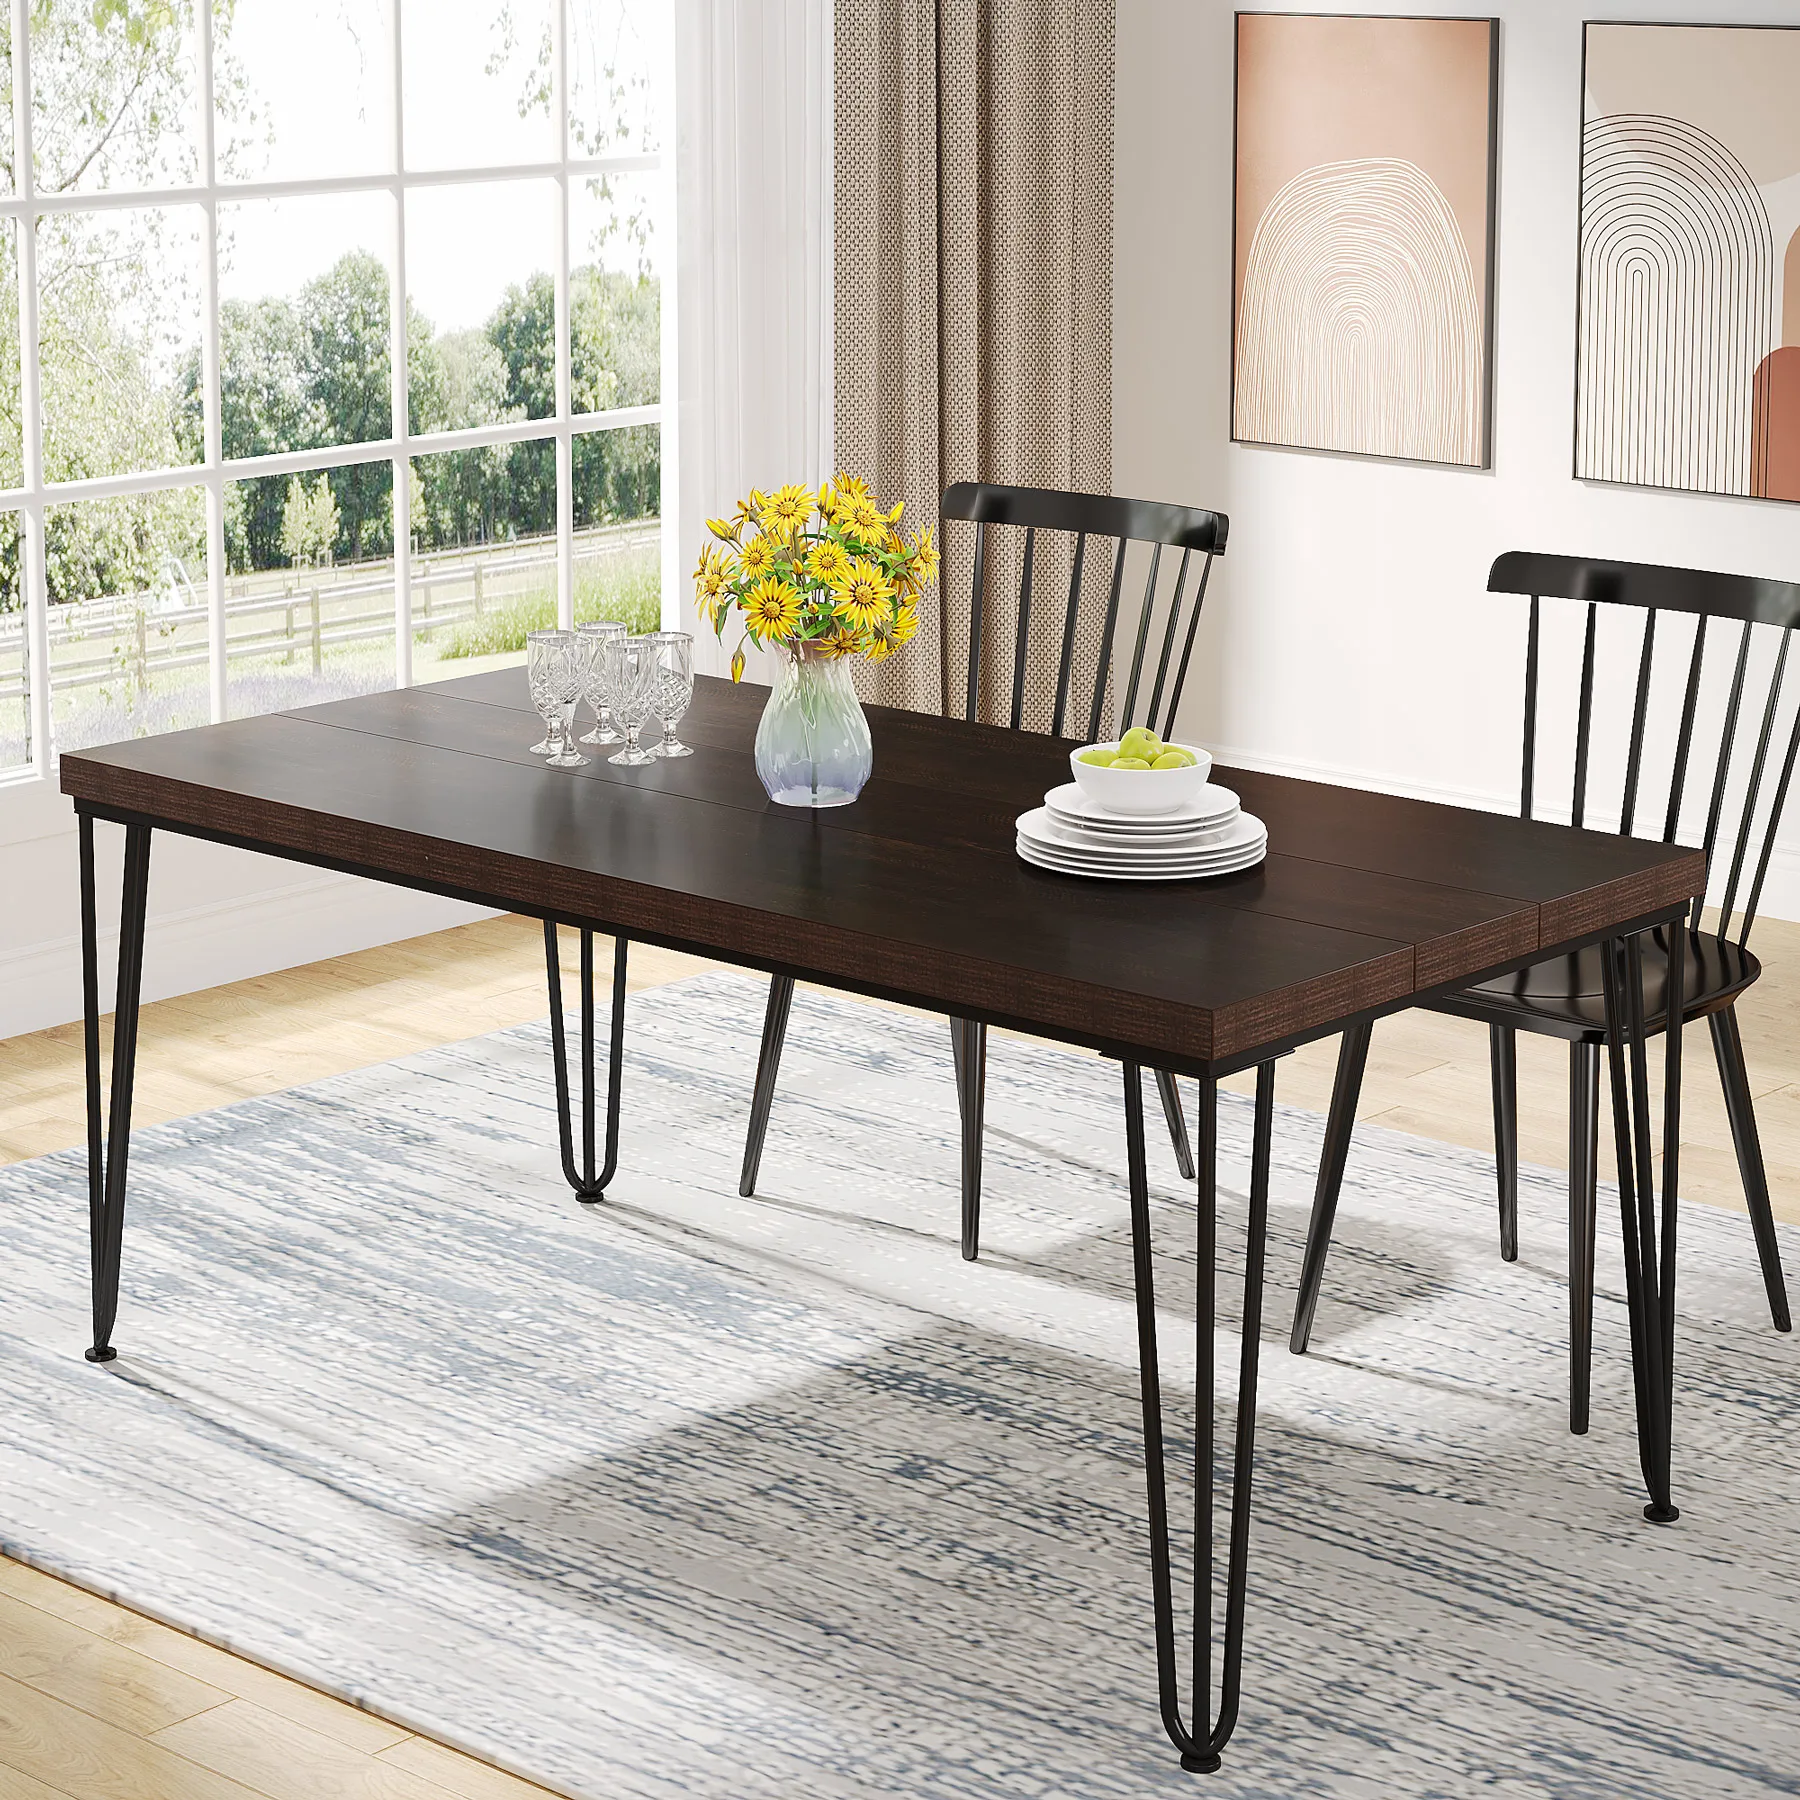 Tribesigns new style dining room furniture modern simple wood metal brown dining table for 6 people